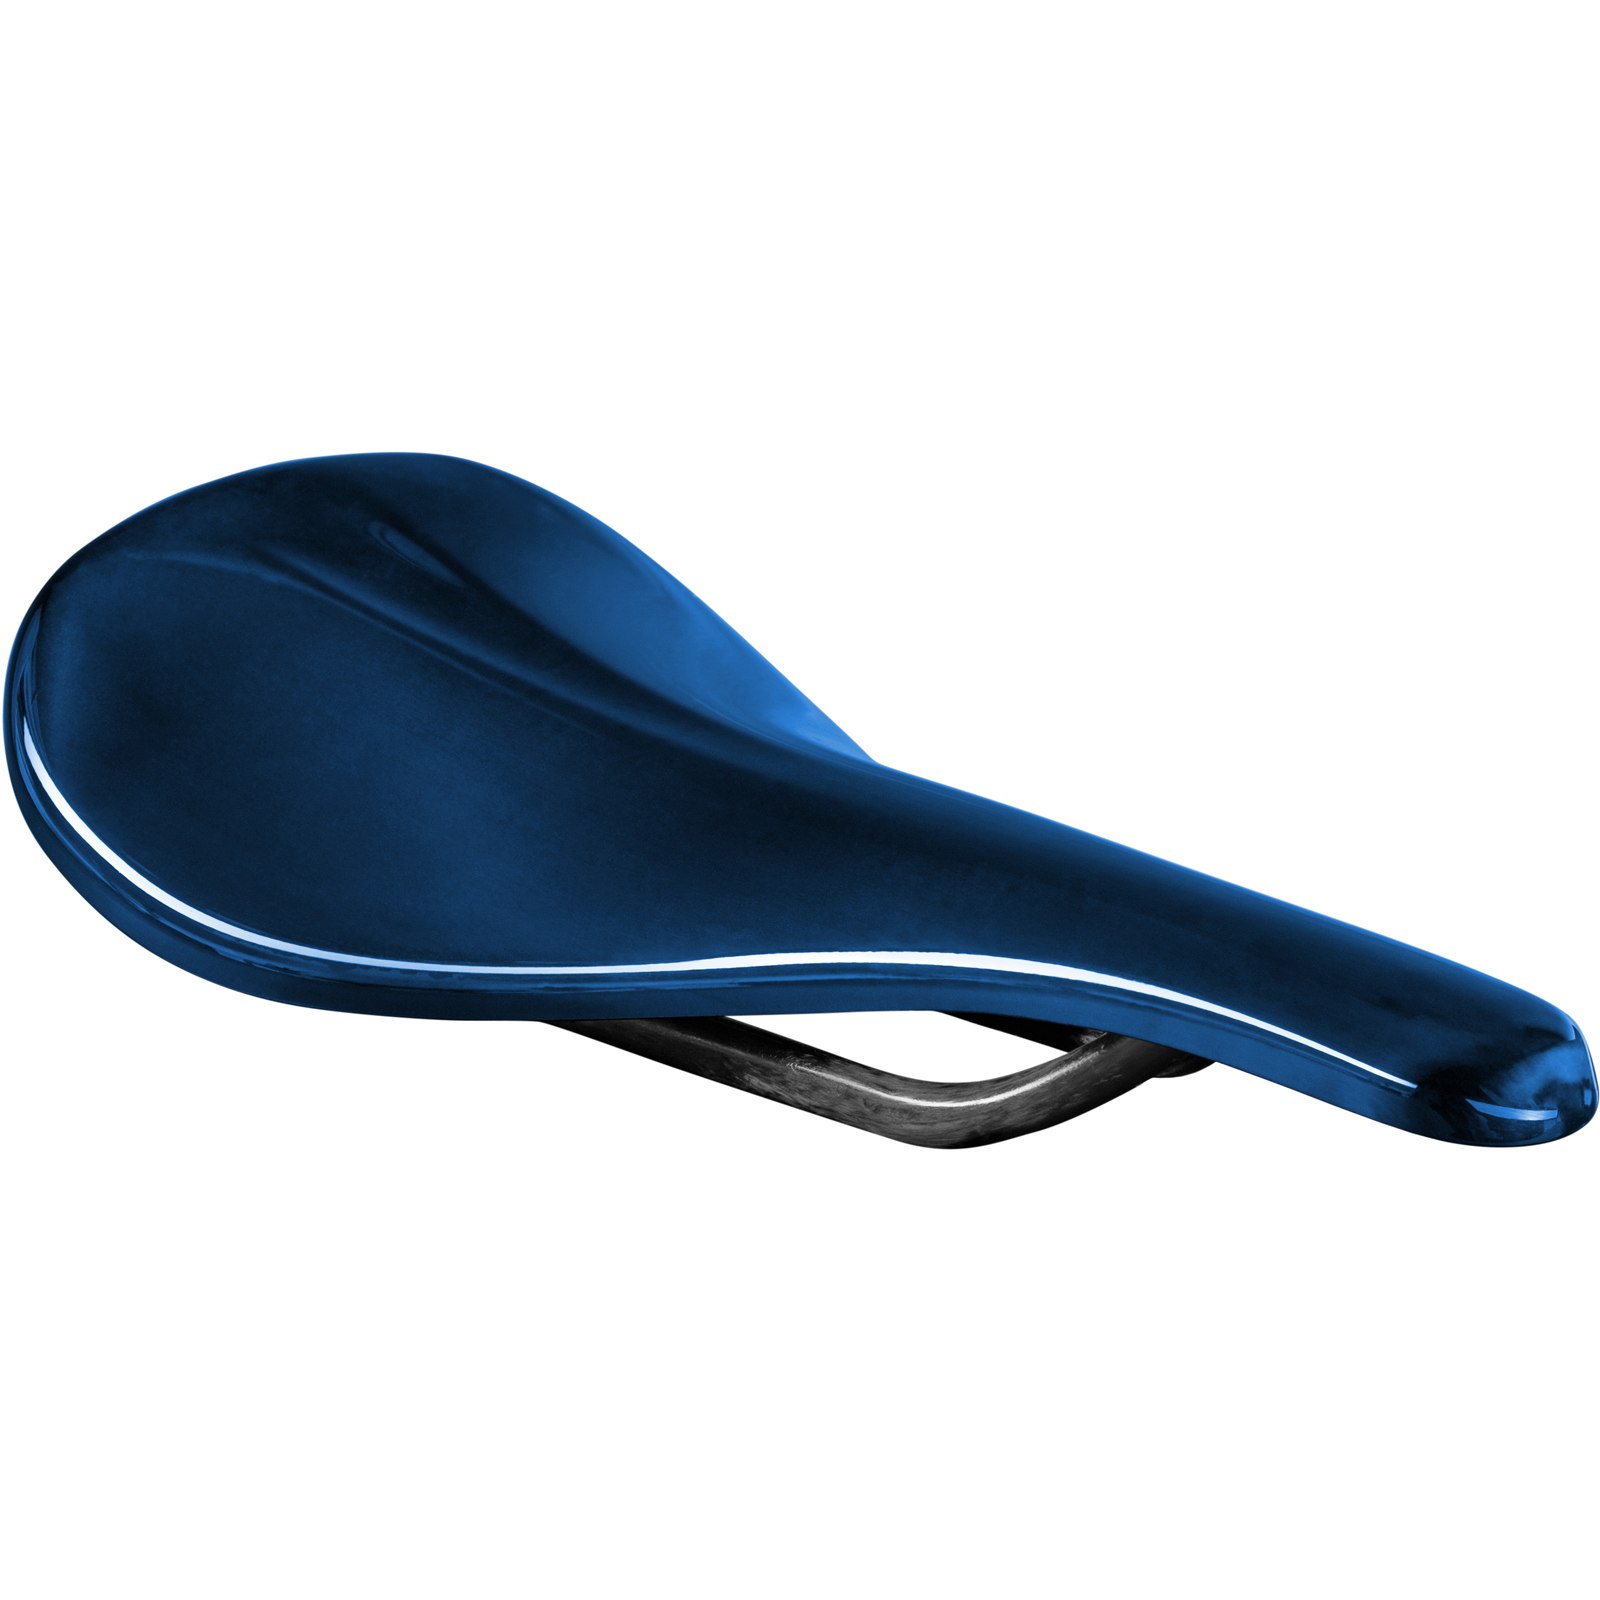 Picture of Beast Components Pure Carbon Saddle - 145mm, UD blue